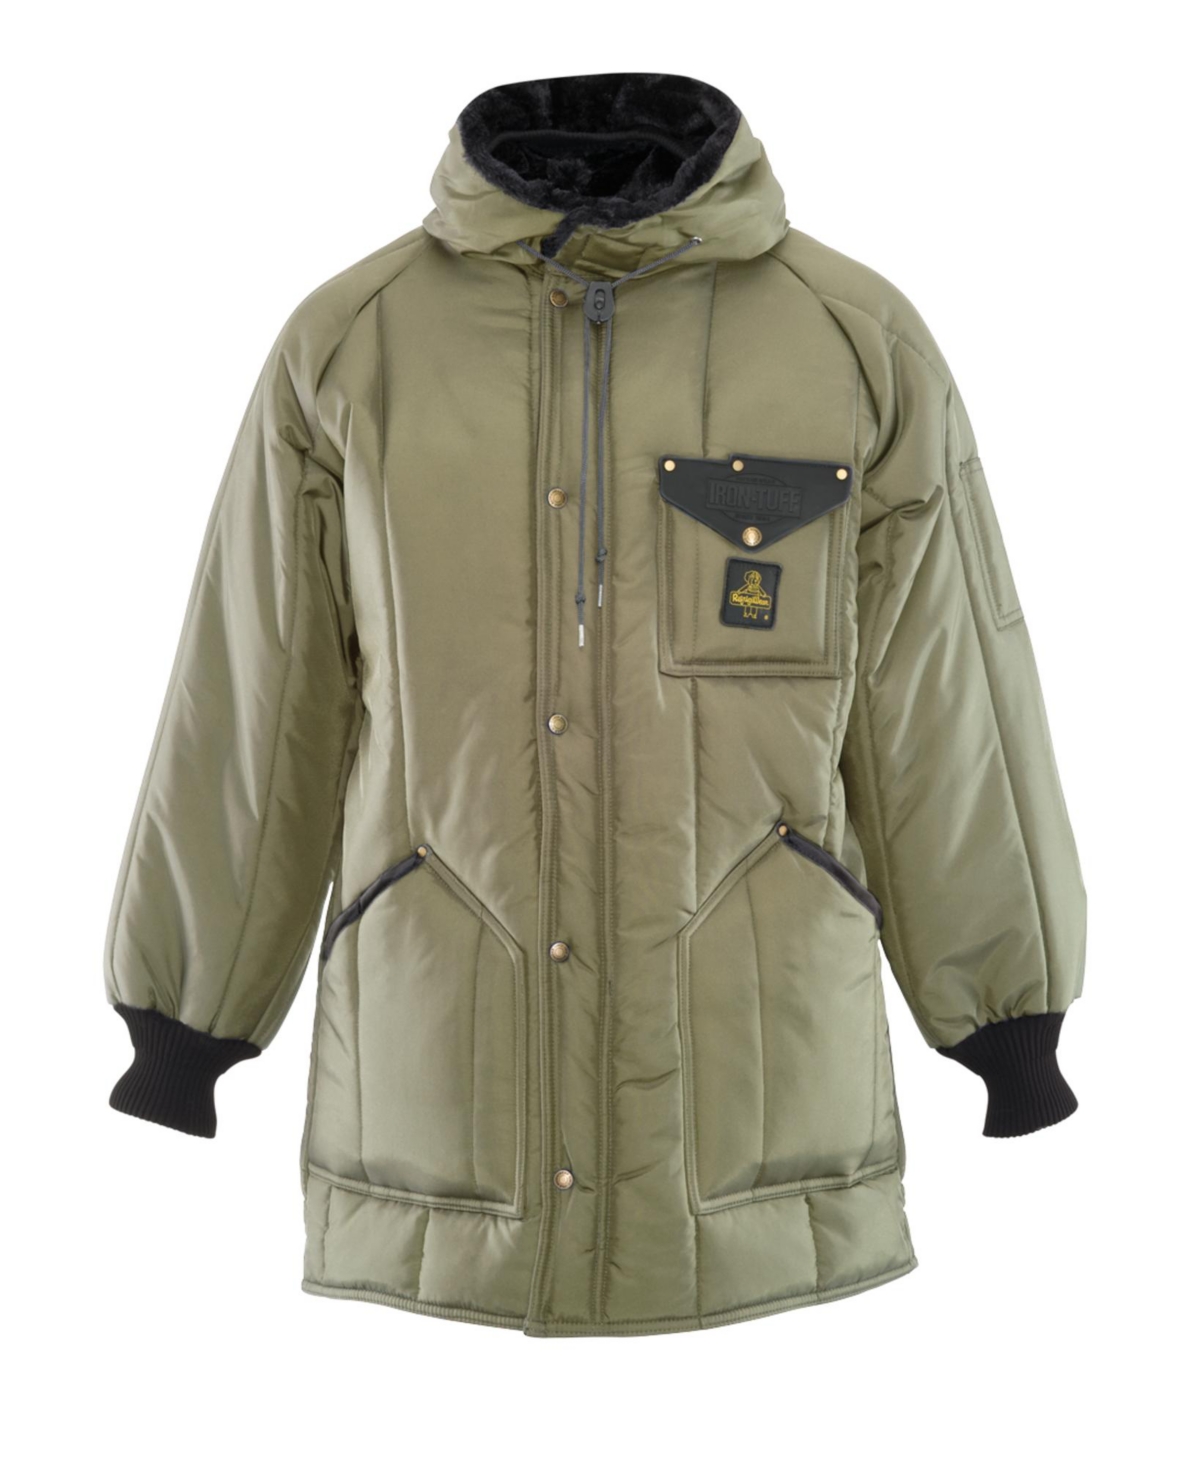 Big & Tall Iron-Tuff Ice Parka with Hood Water-Resistant Insulated Coat - Sage